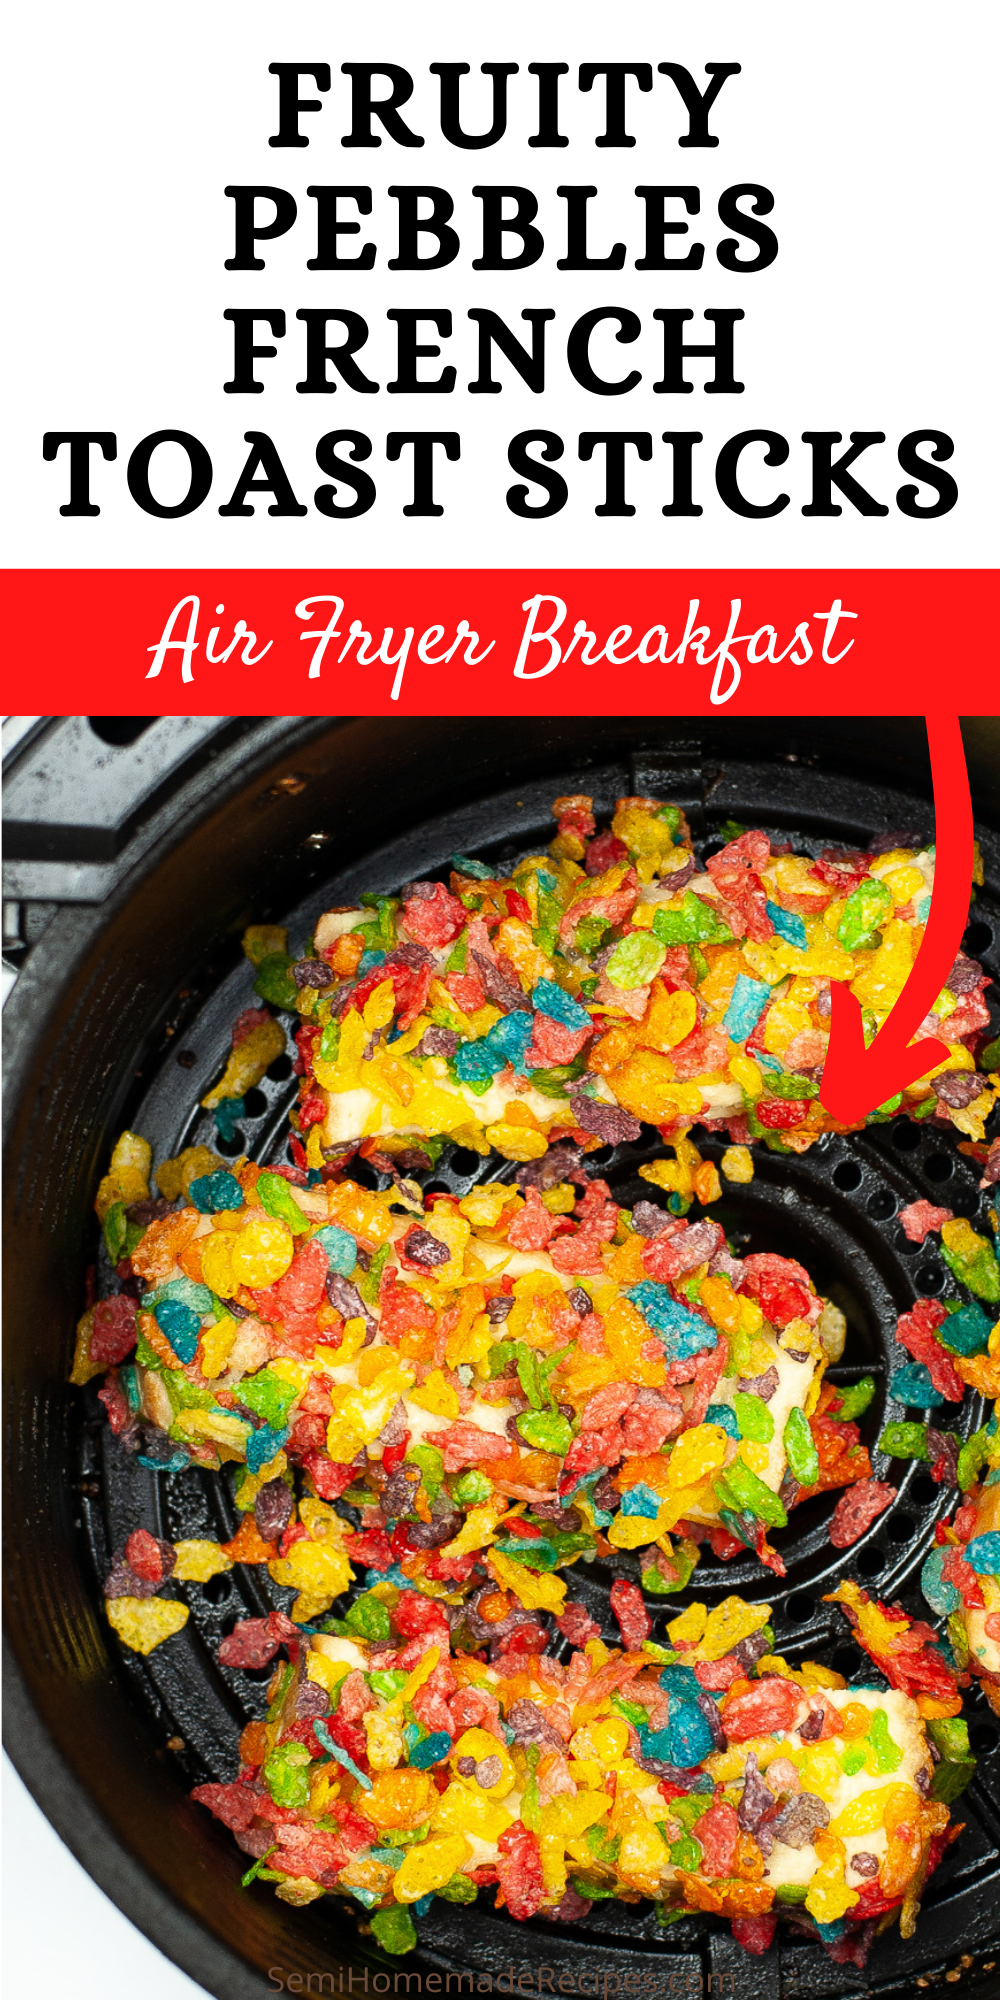 Air Fryer Fruity Pebbles French Toast Sticks are a fun breakfast that kids will love! These cereal French toast sticks are colorful, easy to make and can be made with any of your favorite cereals!